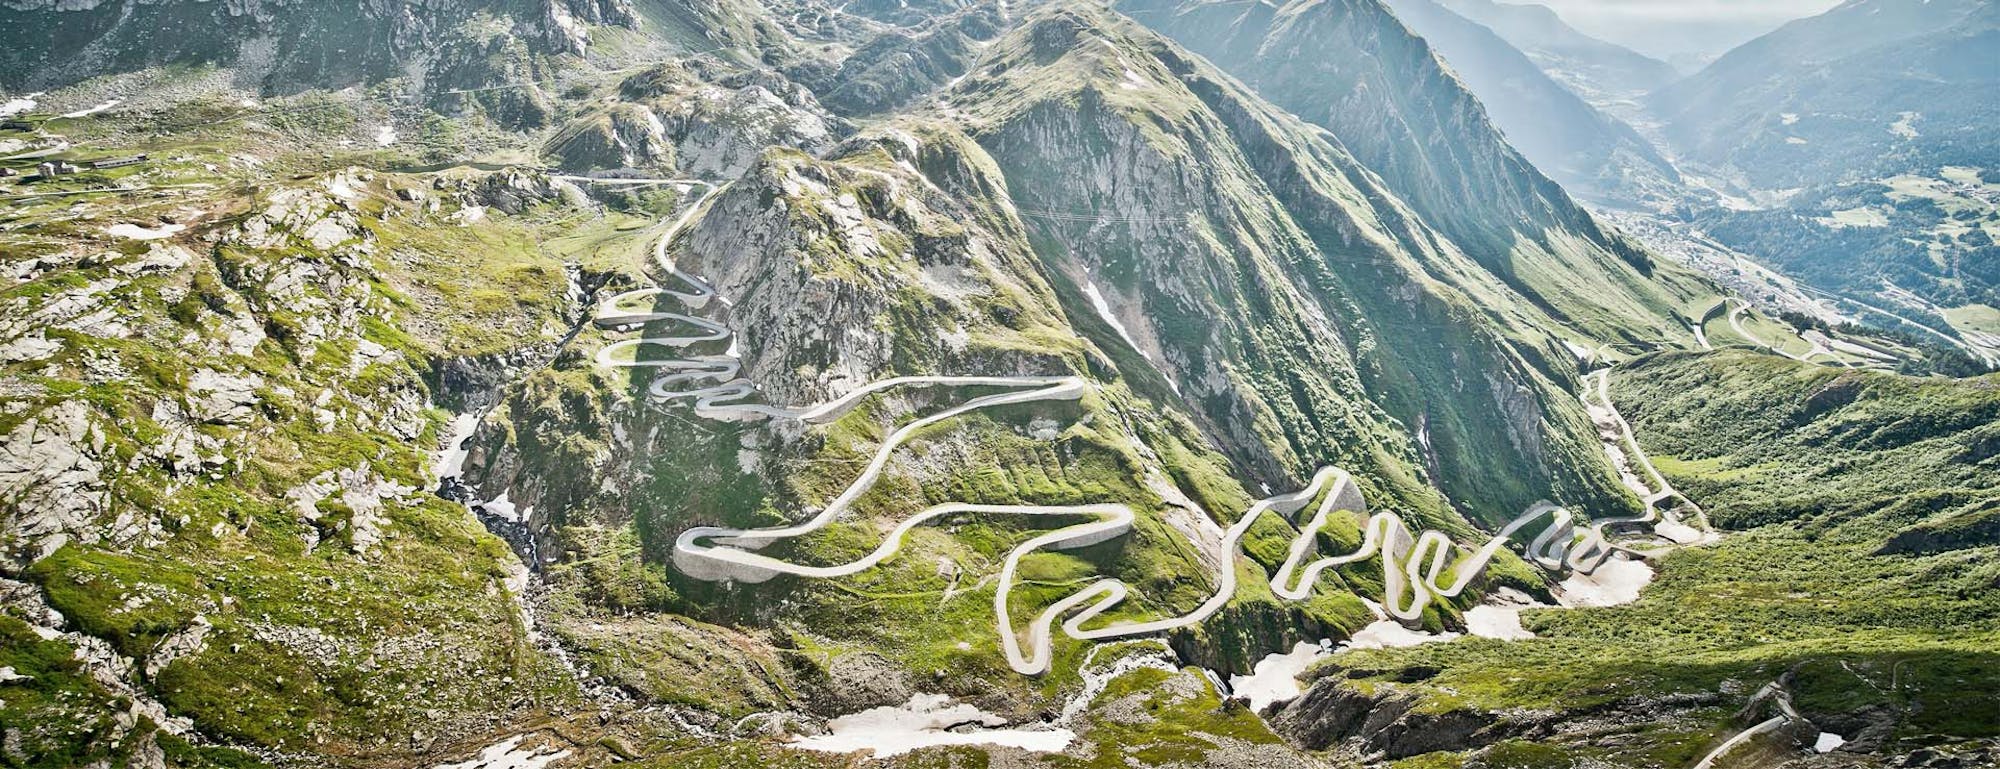 The switchback roads of the Swiss Alps